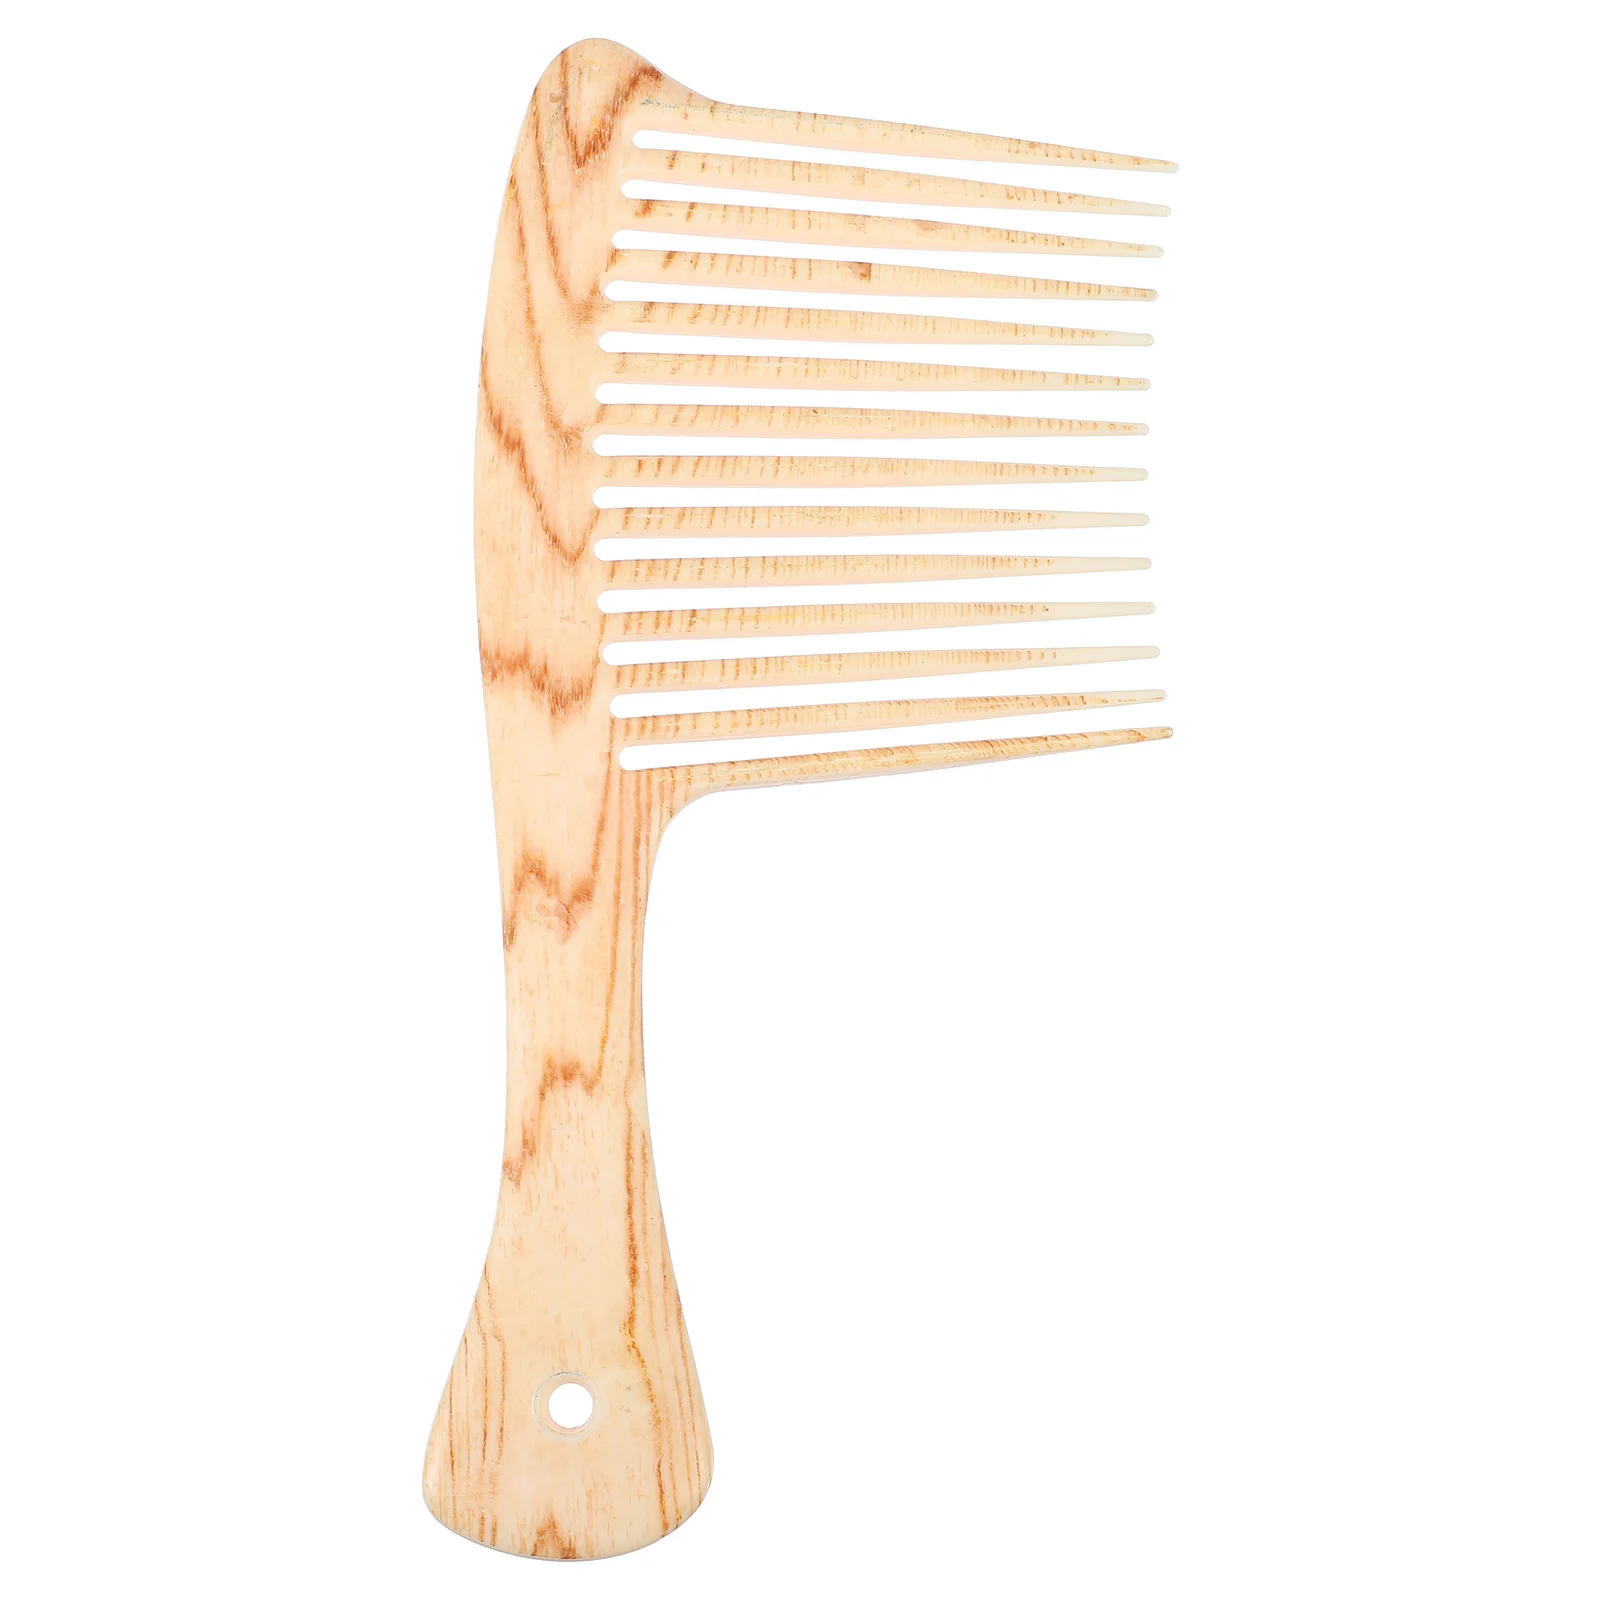 

Comb Wooden Afro Beard Tooth Hair Combs Pick Detangling Wide Wood Hairbrush Curly Haircut Hairstyling Neem